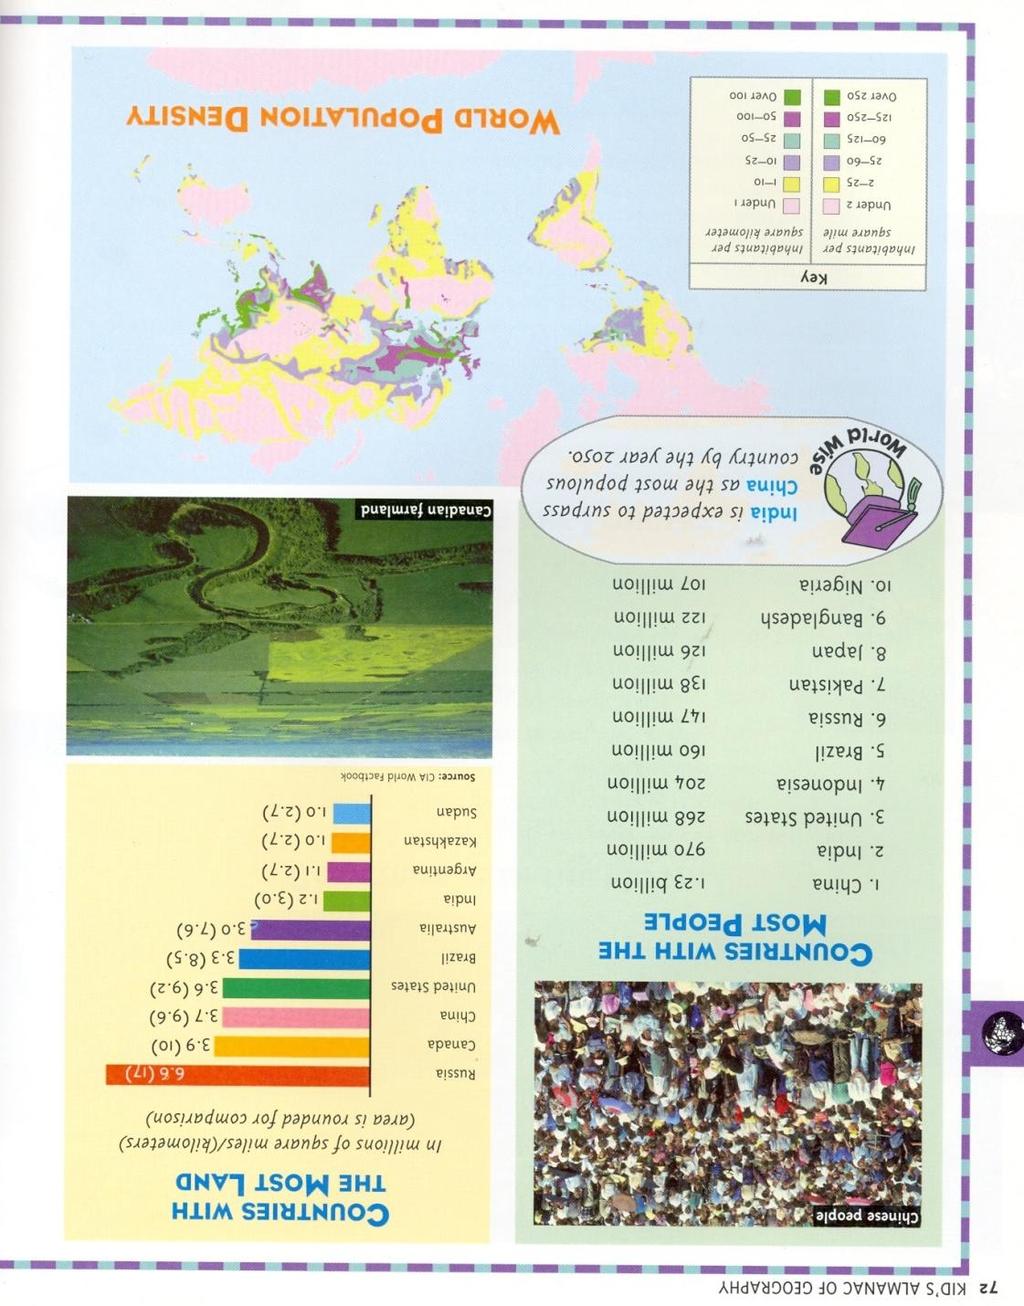 This page in a print almanac shows current statistical